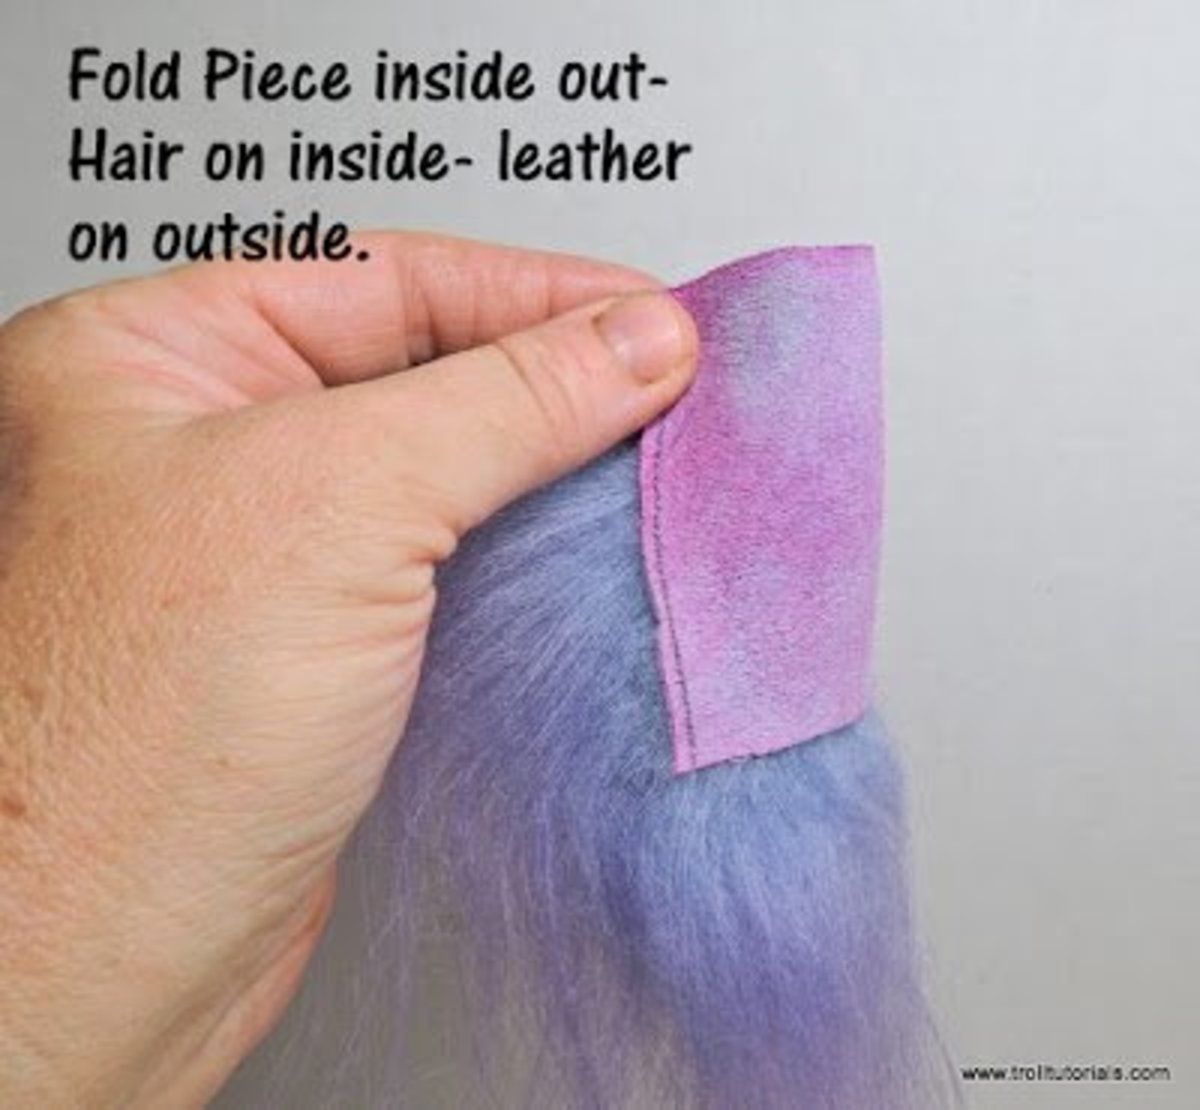 1. Fold the hair as shown above with the hair on the inside and the leather on the outside. 